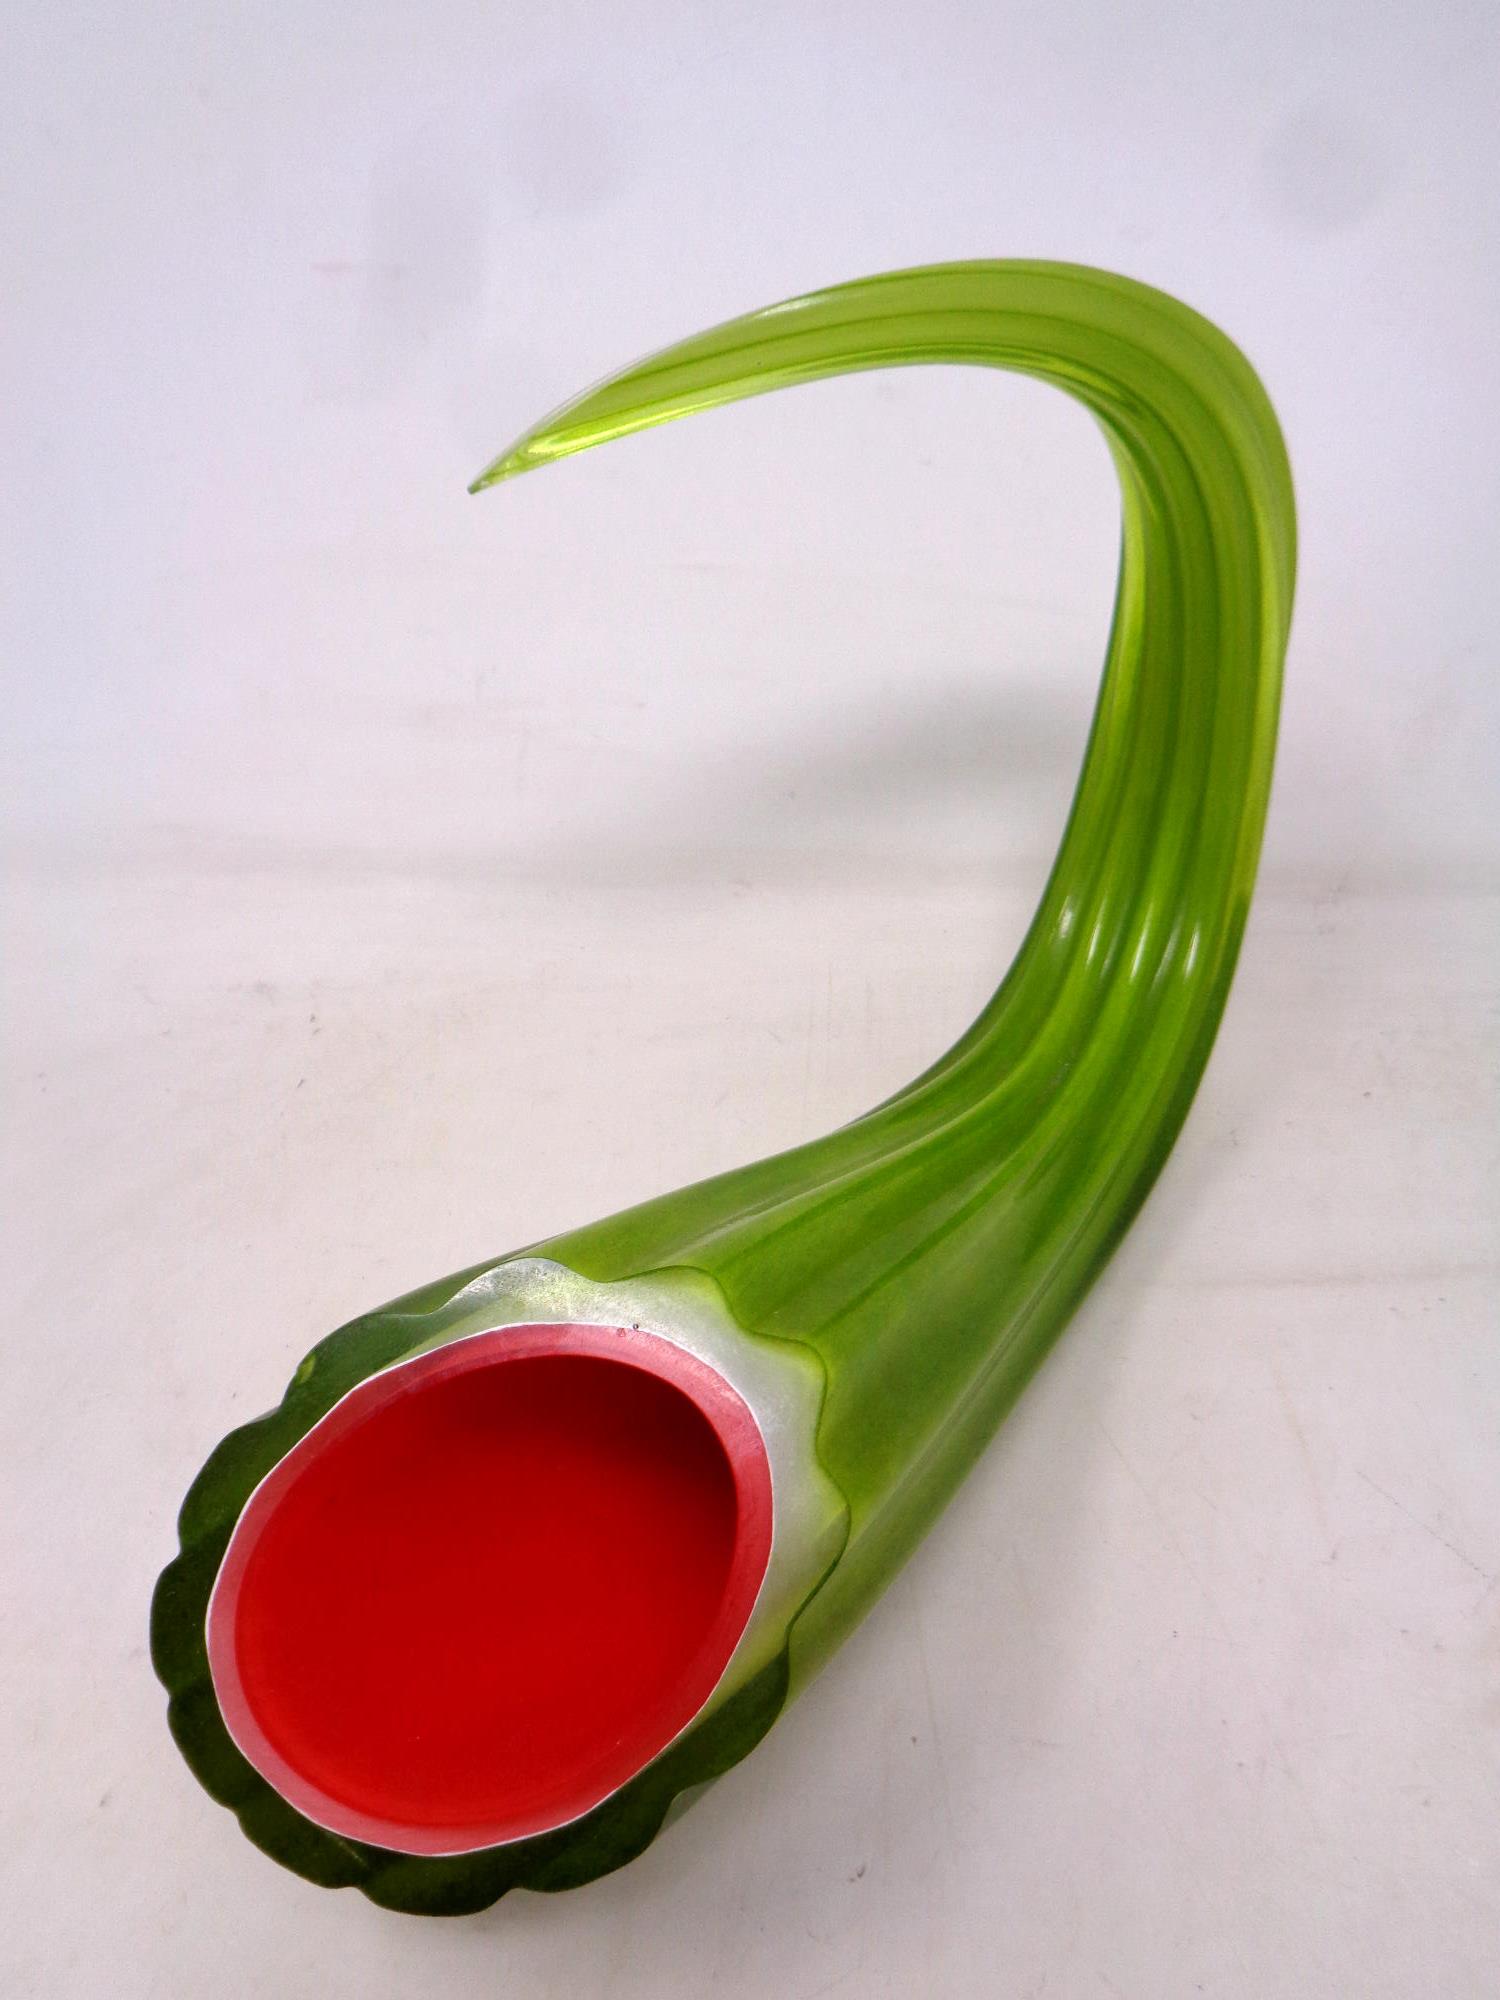 A Roger Tye art glass sculpture, signed to base.